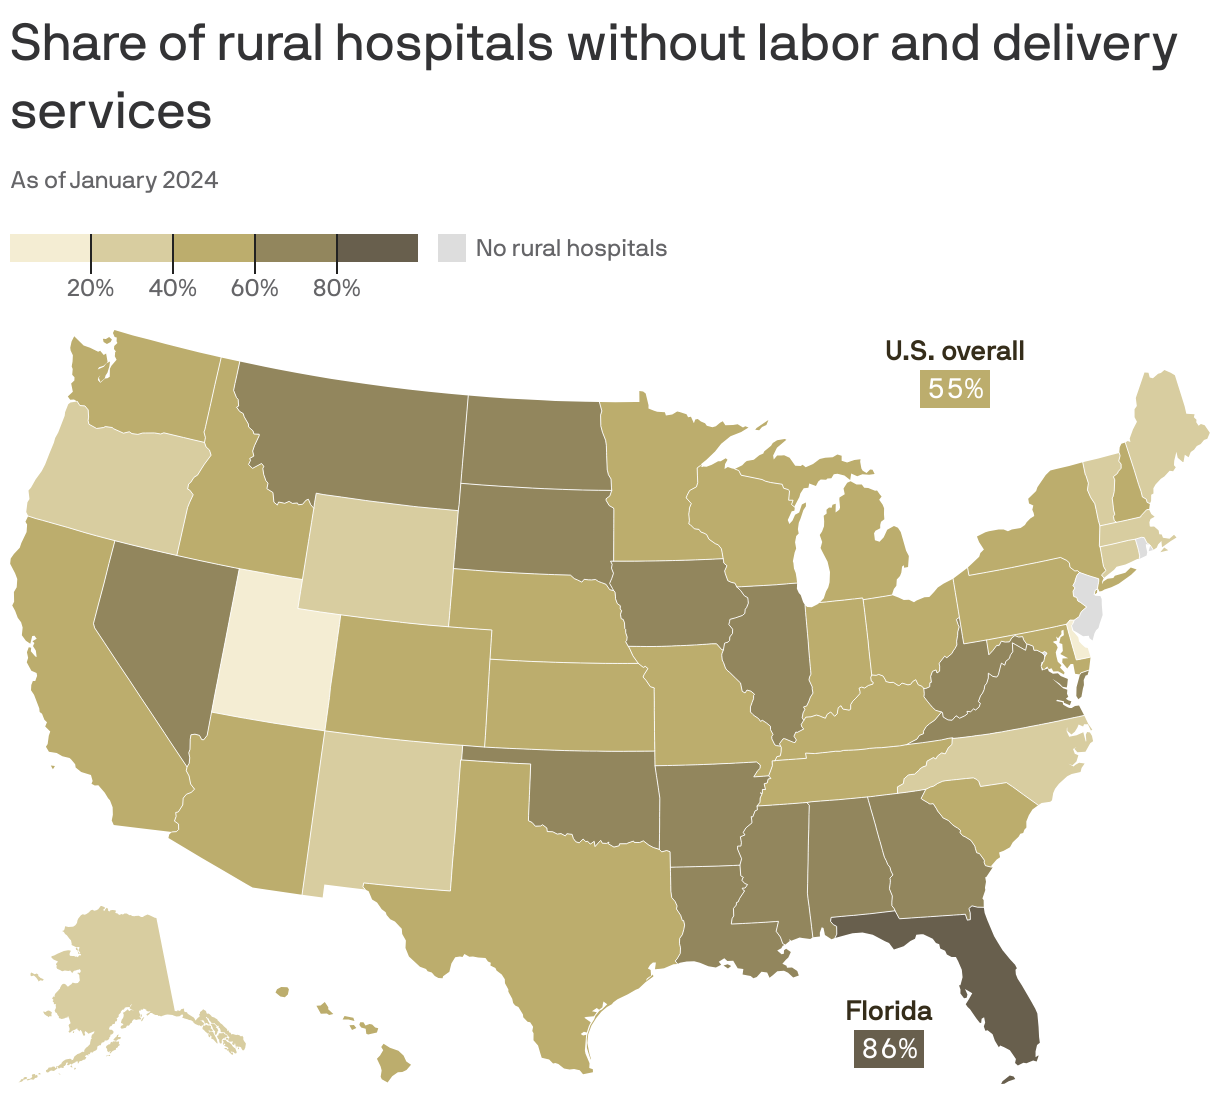 Share of rural hospitals without labor and delivery services